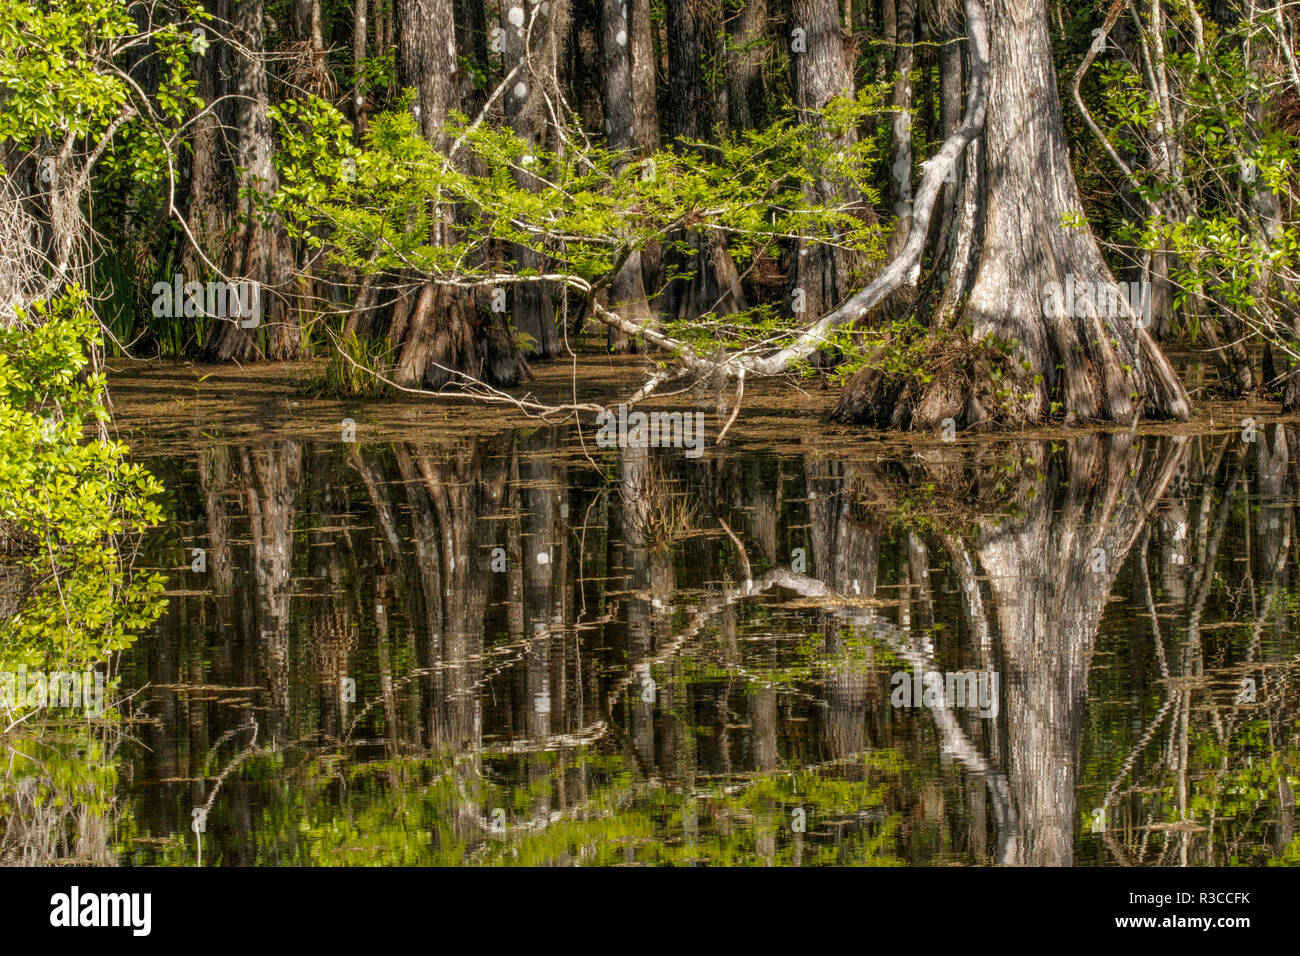 Bald cypress trees and reflection, Six Mile Cypress Slough Preserve, Fort Myers, Florida, Taxodium distichum Stock Photo